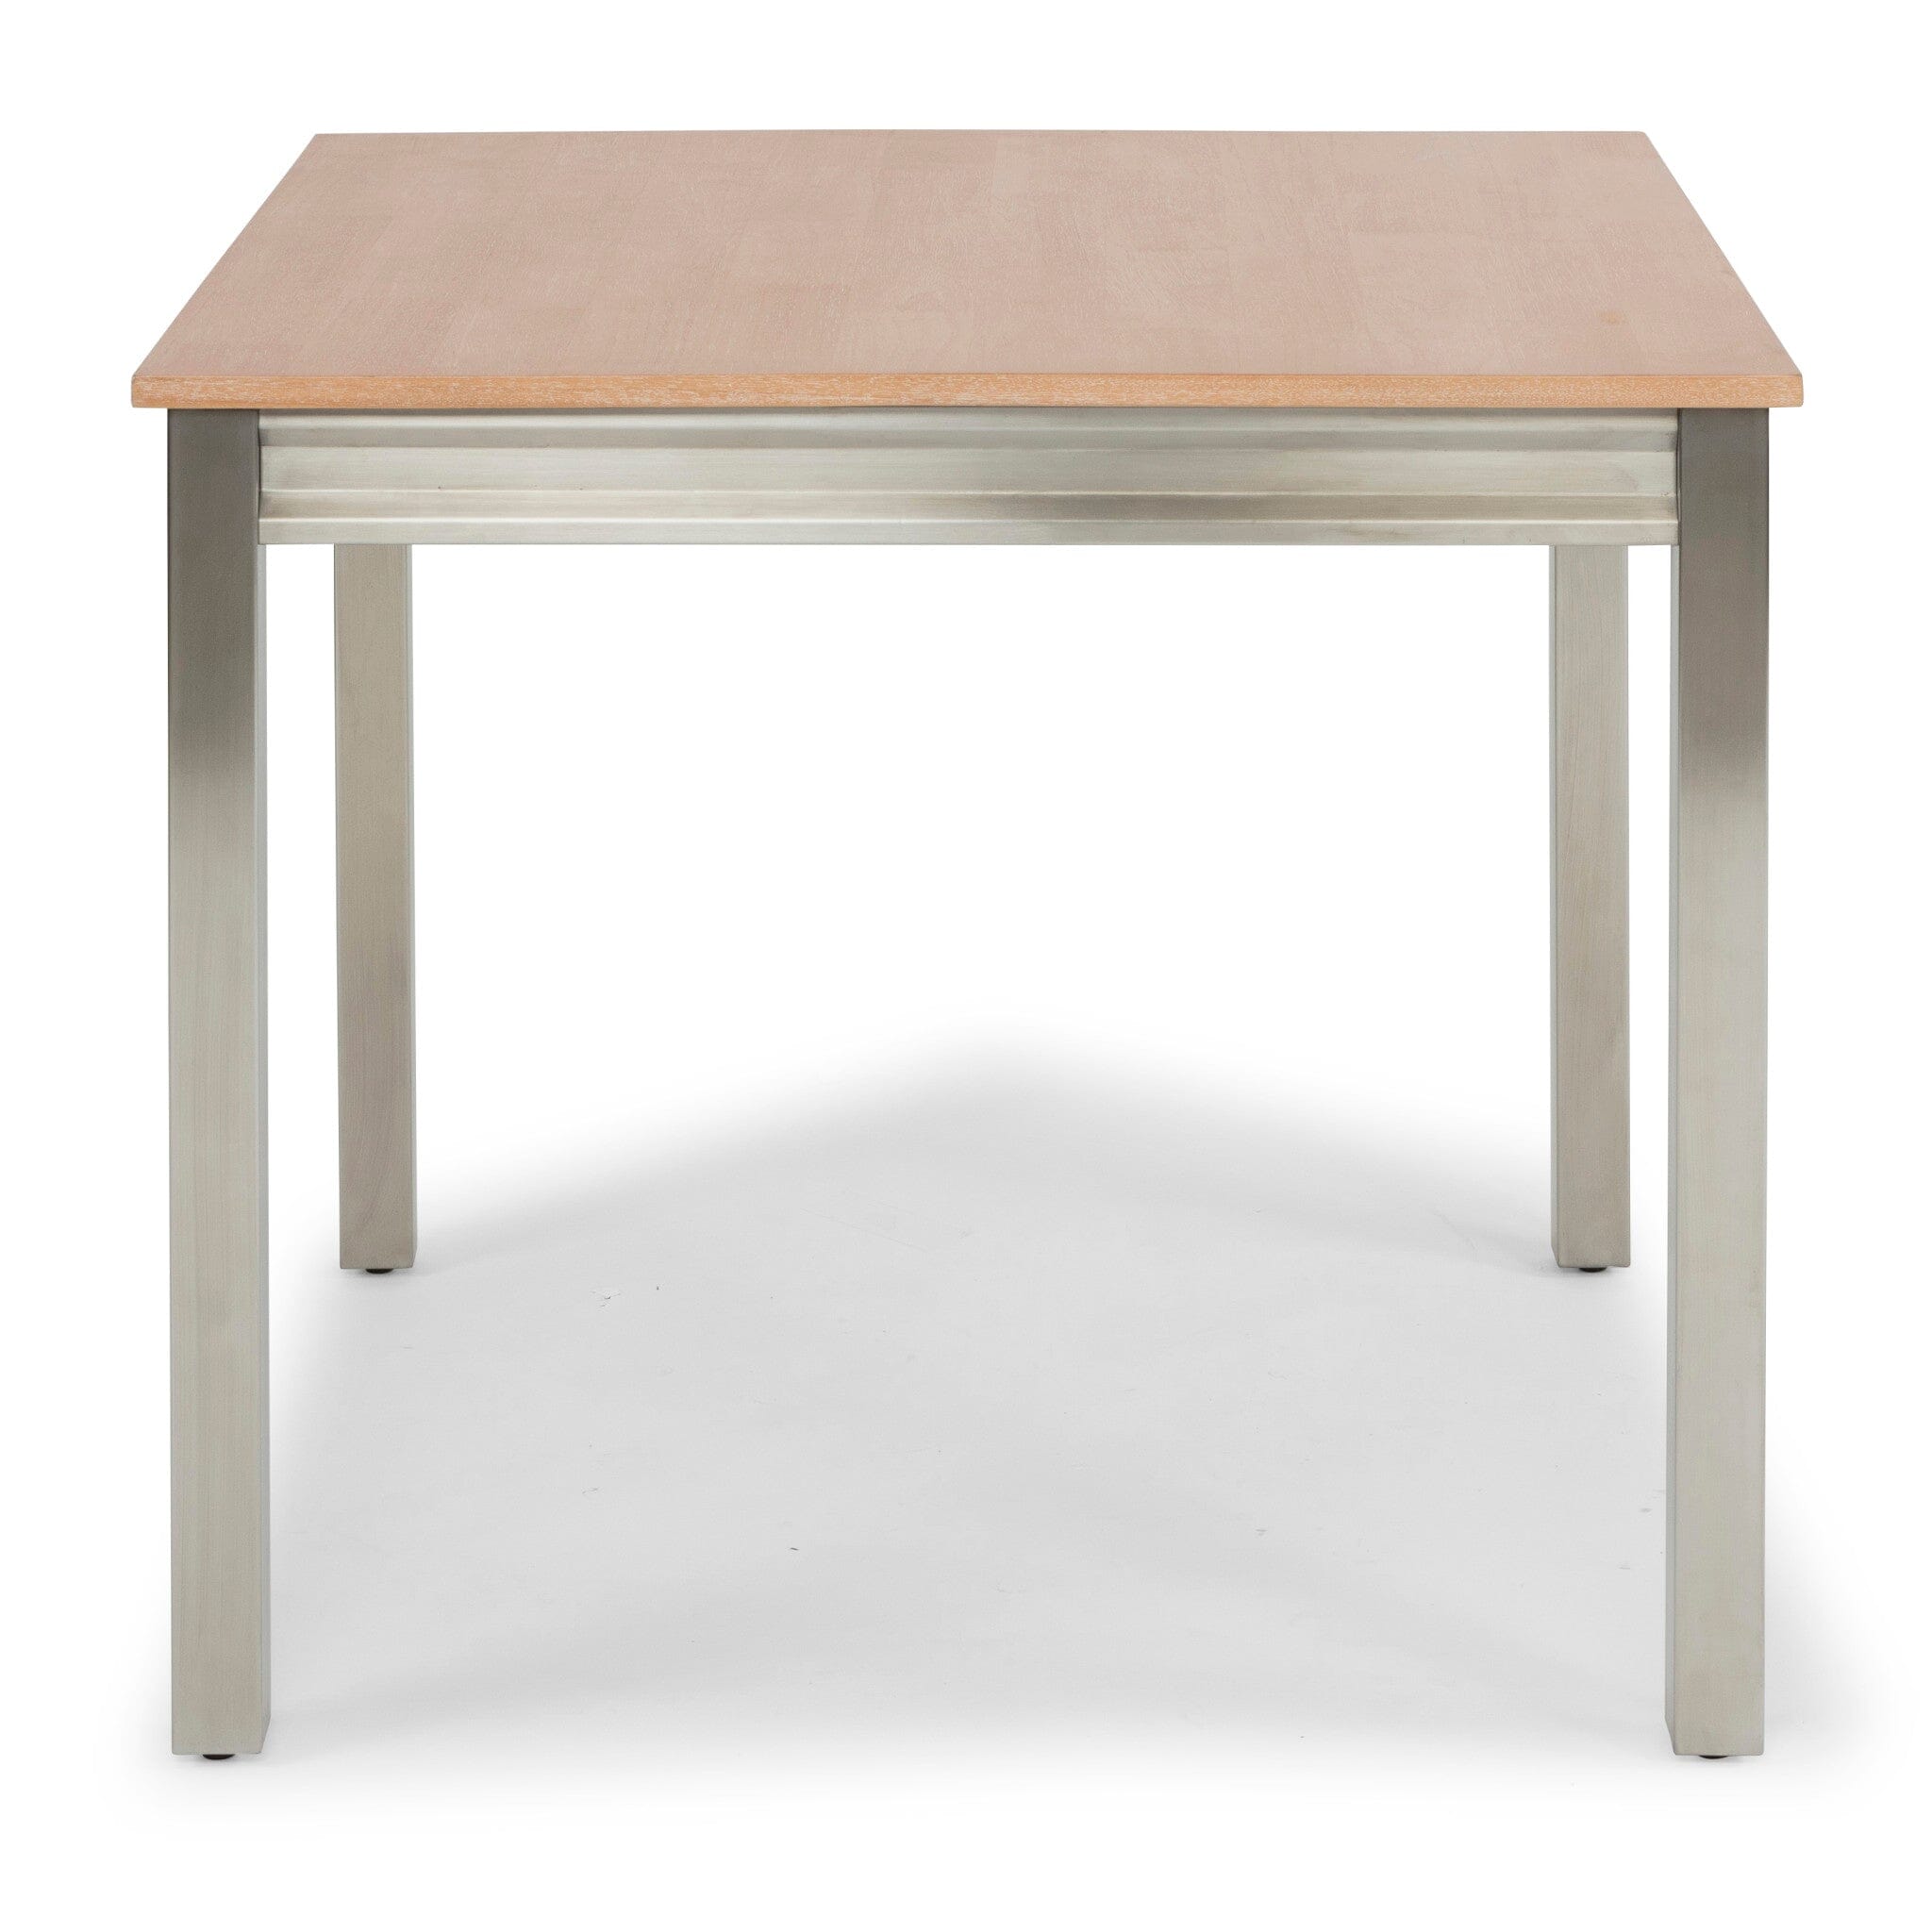 Modern & Contemporary Dining Table By Sheffield Dining Table Sheffield